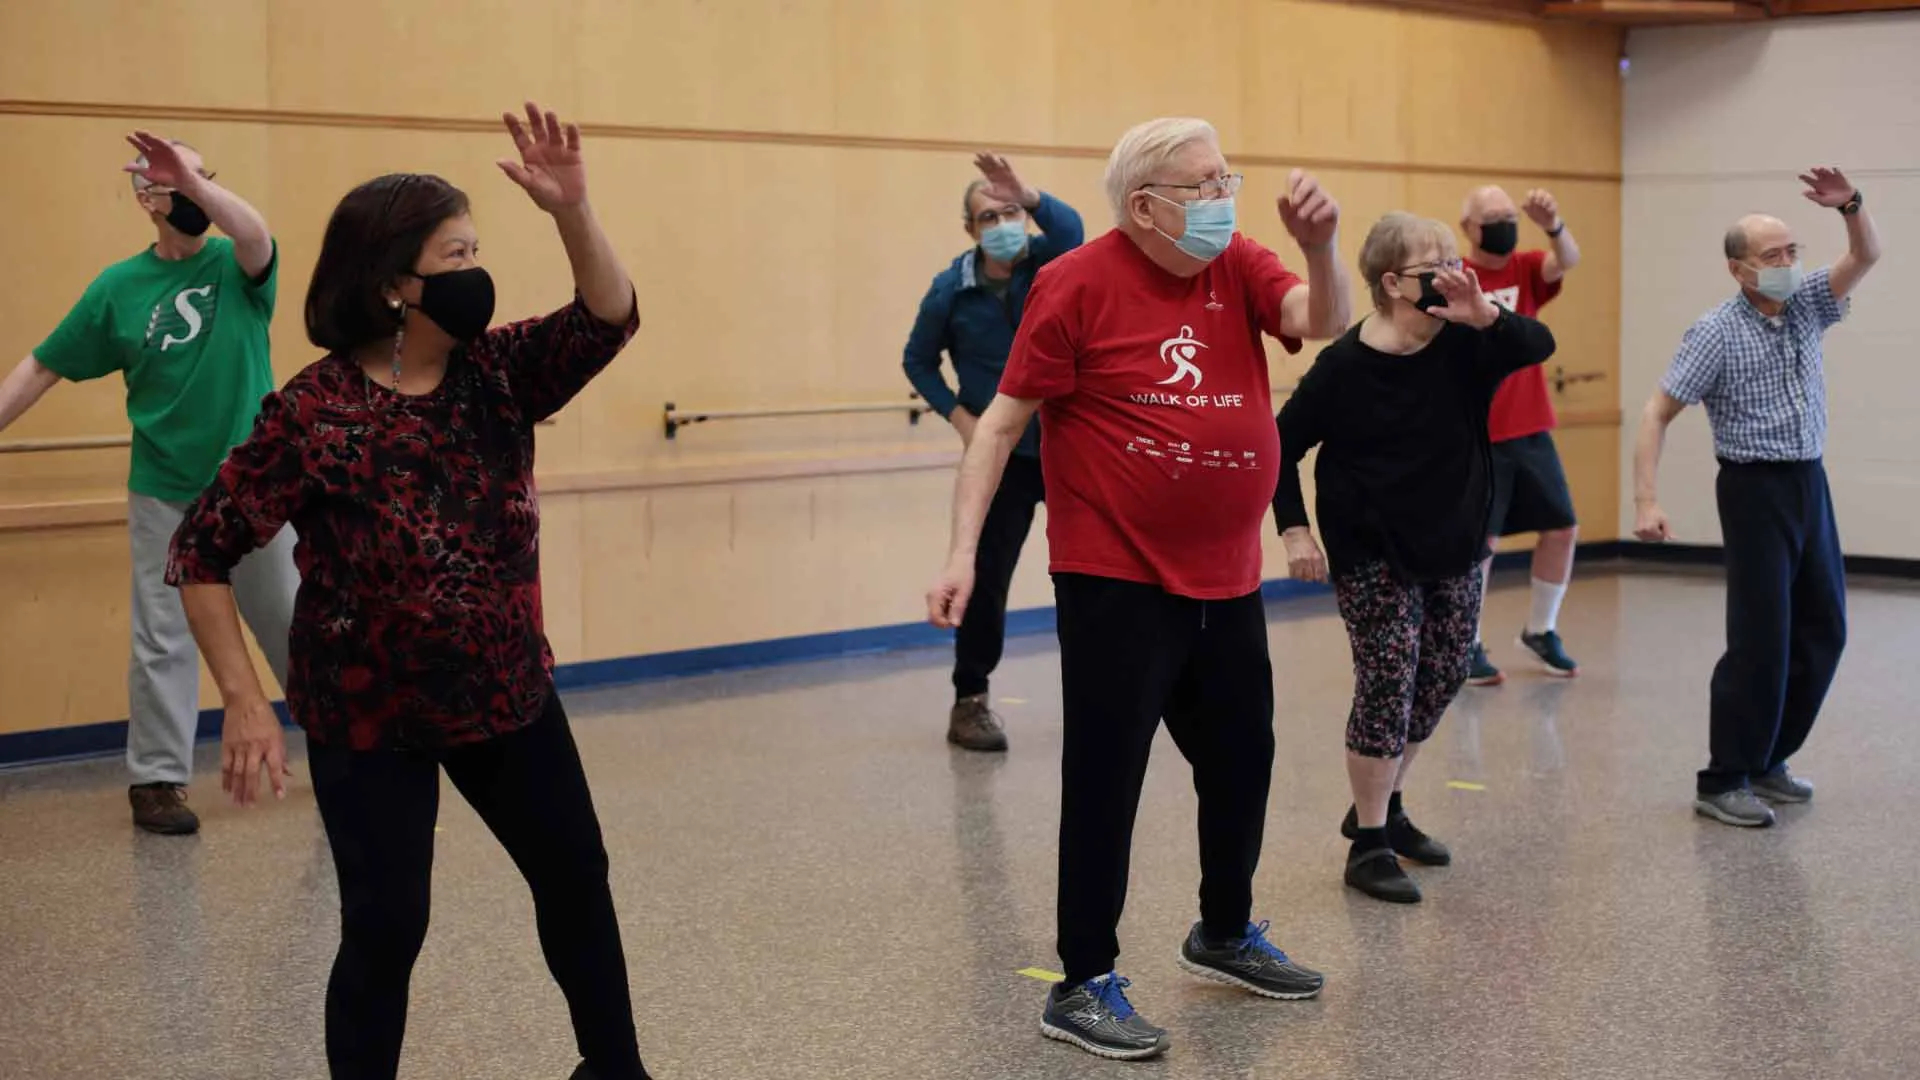 A YMCA Healthy Heart program in session with people with cardiac risk exercising